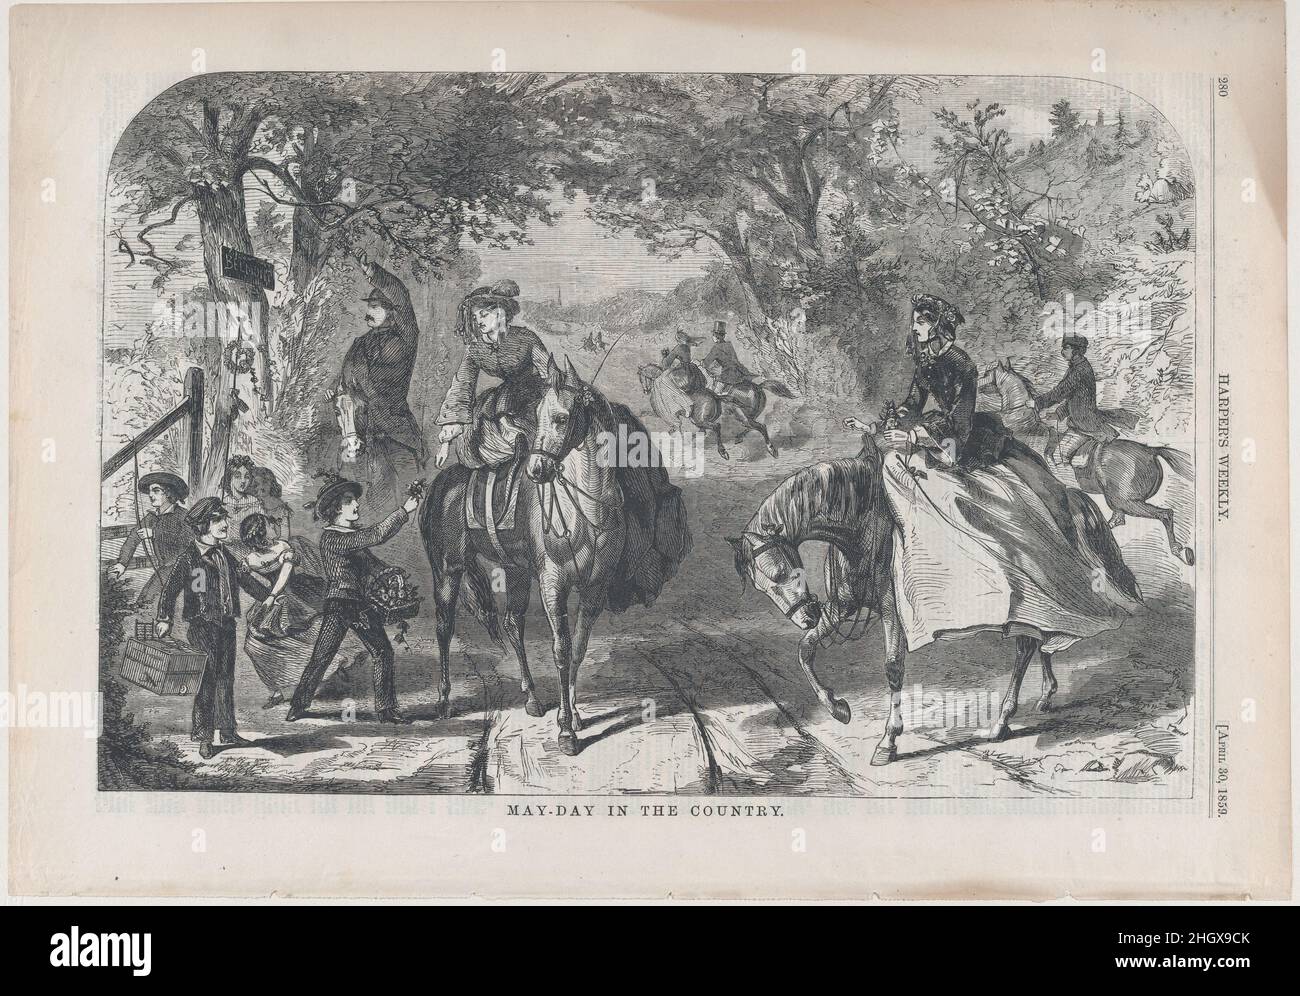 May-Day in the Country (from 'Harper's Weekly,' Vol. III) April 30, 1859 After Winslow Homer American. May-Day in the Country (from 'Harper's Weekly,' Vol. III). After Winslow Homer (American, Boston, Massachusetts 1836–1910 Prouts Neck, Maine). April 30, 1859. Wood engraving. Harper's Weekly (American, 1857–1916). Prints Stock Photo